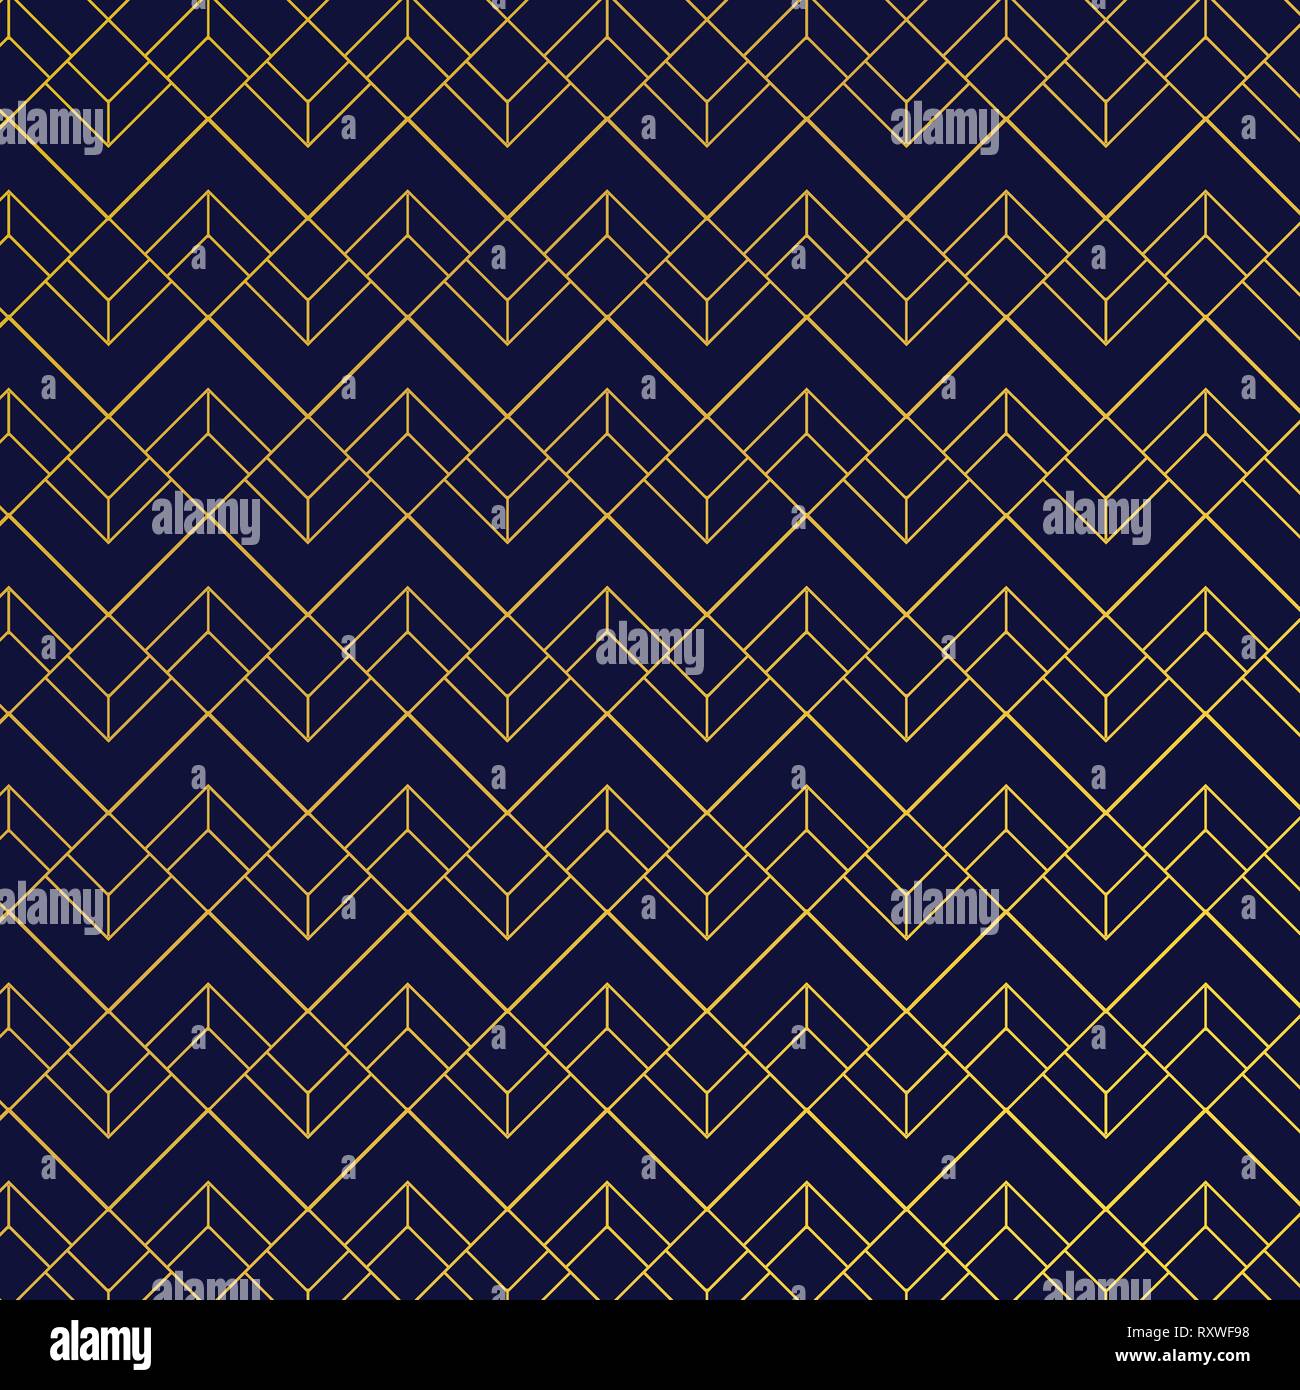 Gold geometric pattern with lines on dark blue background art deco style. Vector illustration Stock Vector